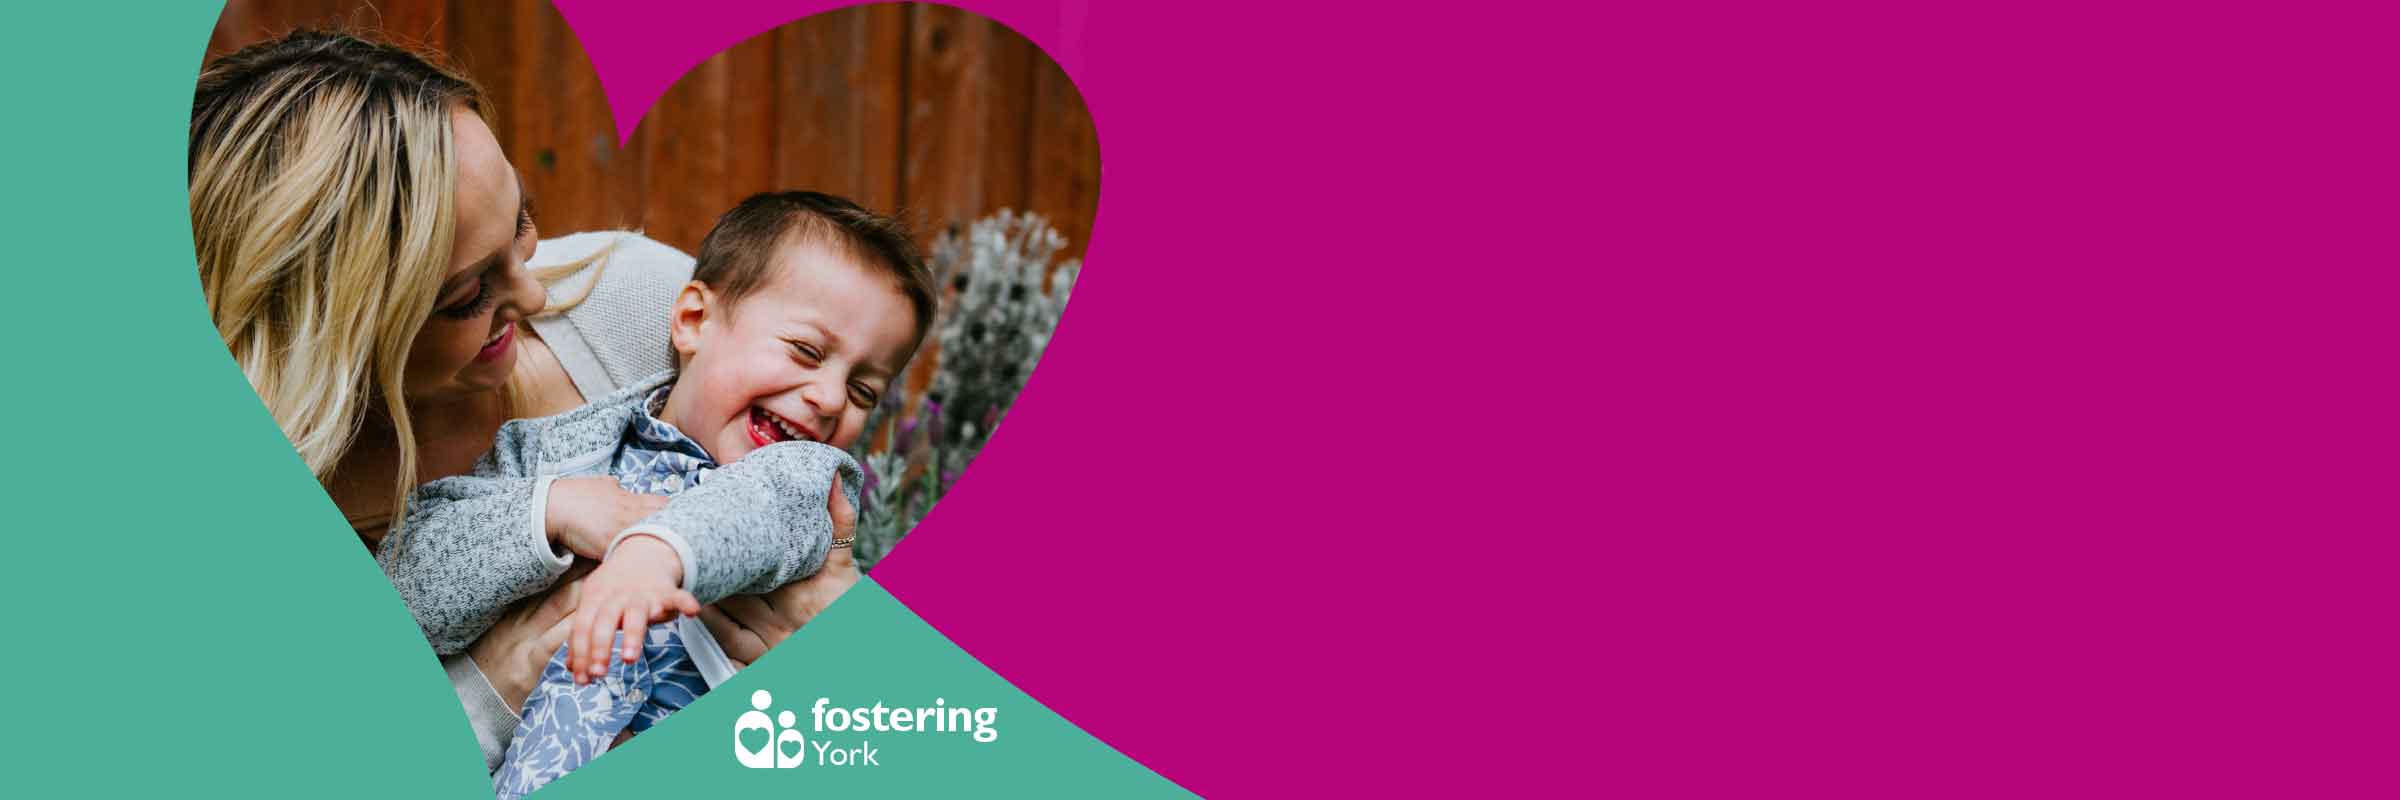 Mother and child smiling at one another inside a heart on a pink and blue background with the Fostering York logo